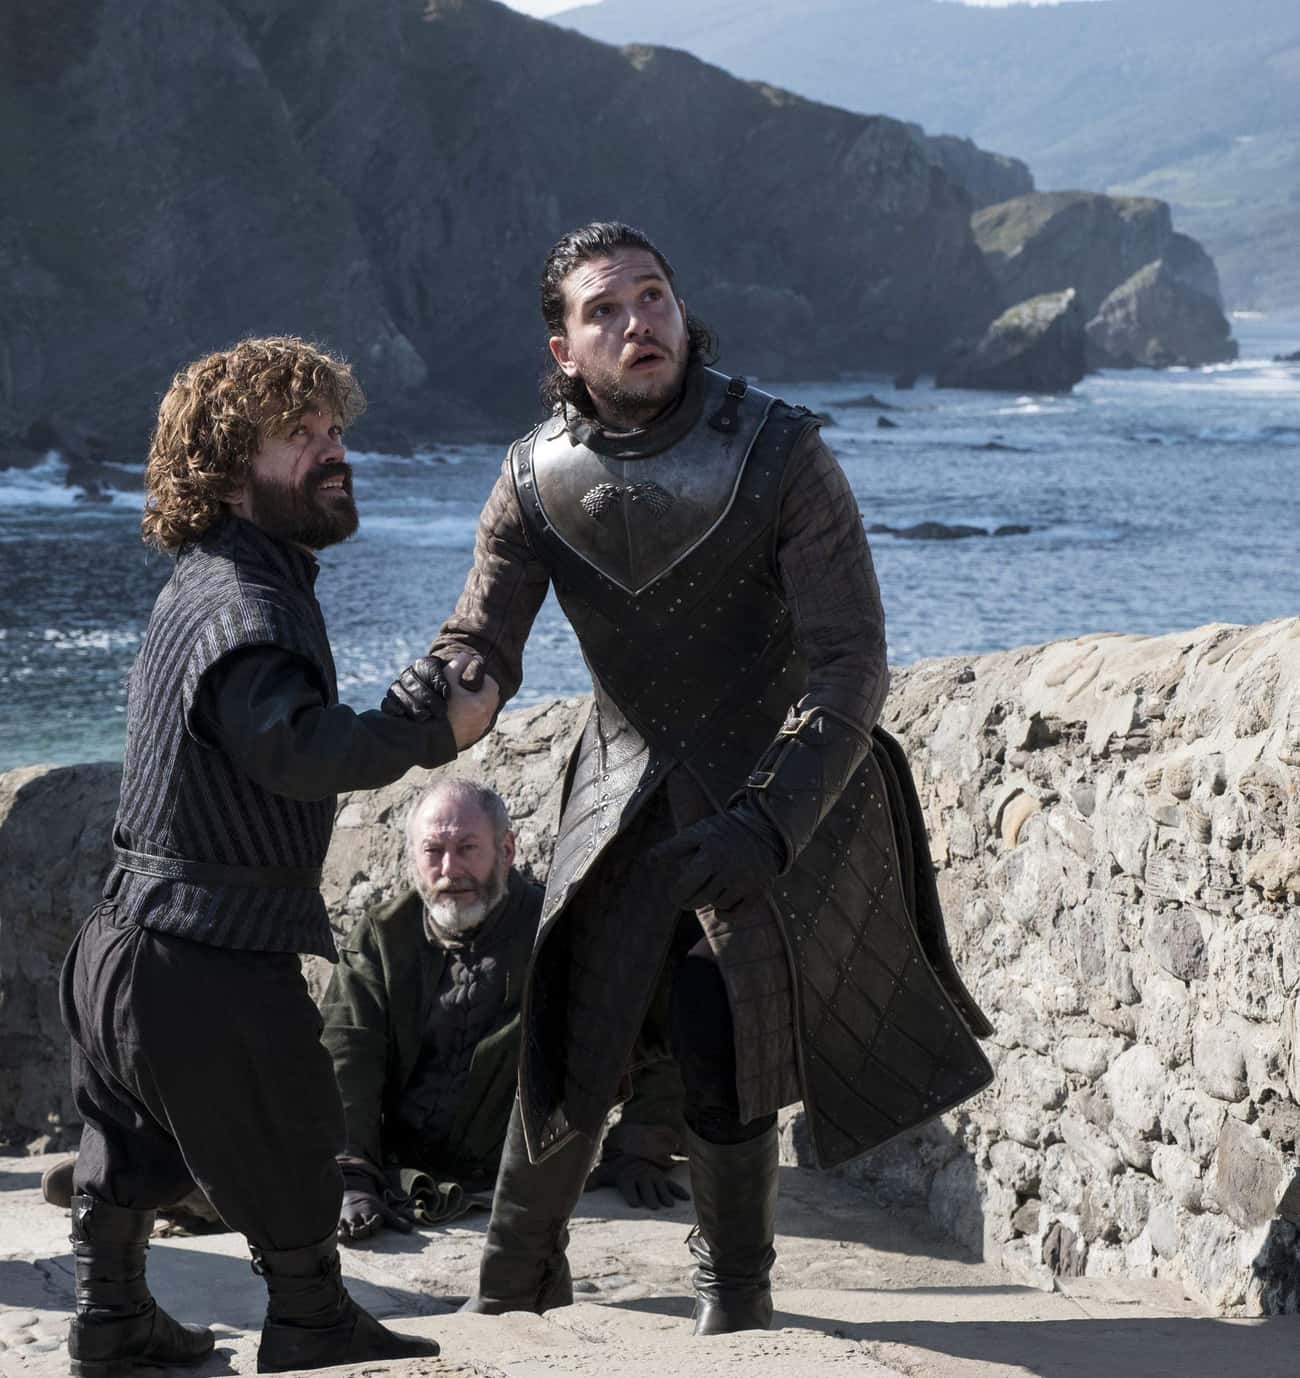 Tyrion And Jon Developed A Deadly Rivalry For Arya’s Love